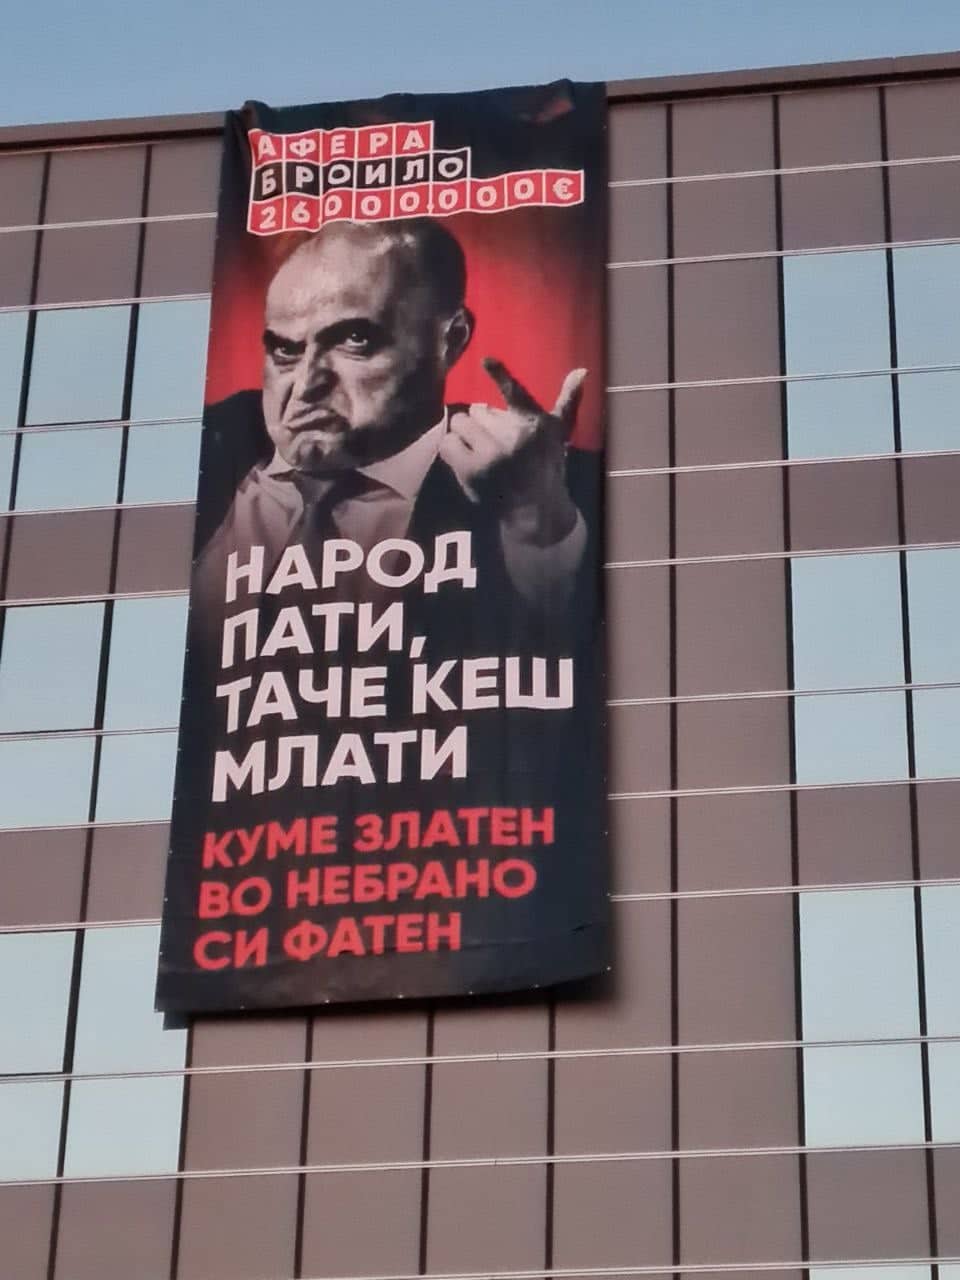 Posters of Kovacevski and messages related to the latest scandal he is involved in displayed in several locations around Skopje